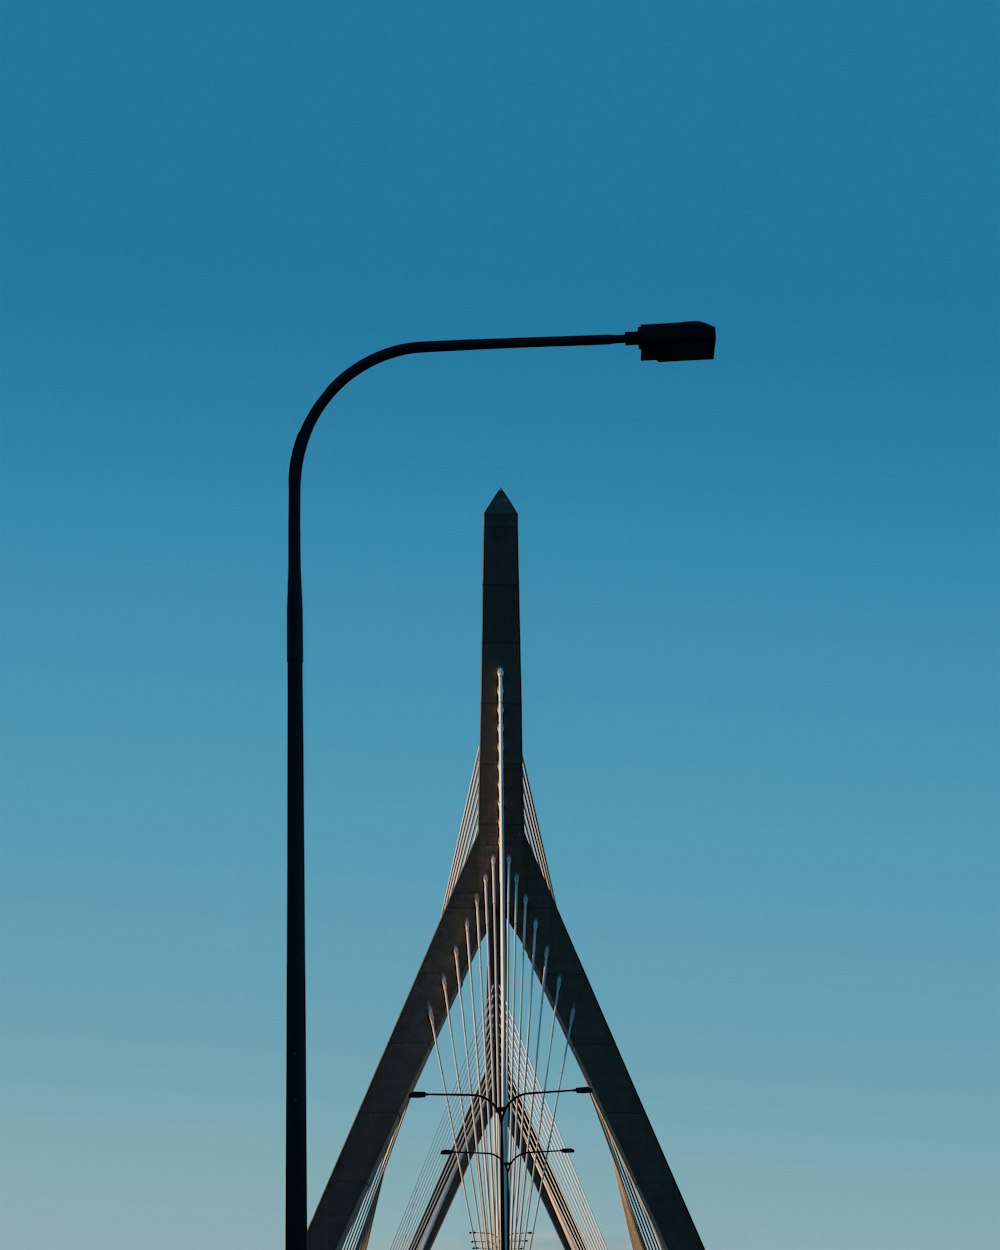 a street light on a pole with a blue sky in the background